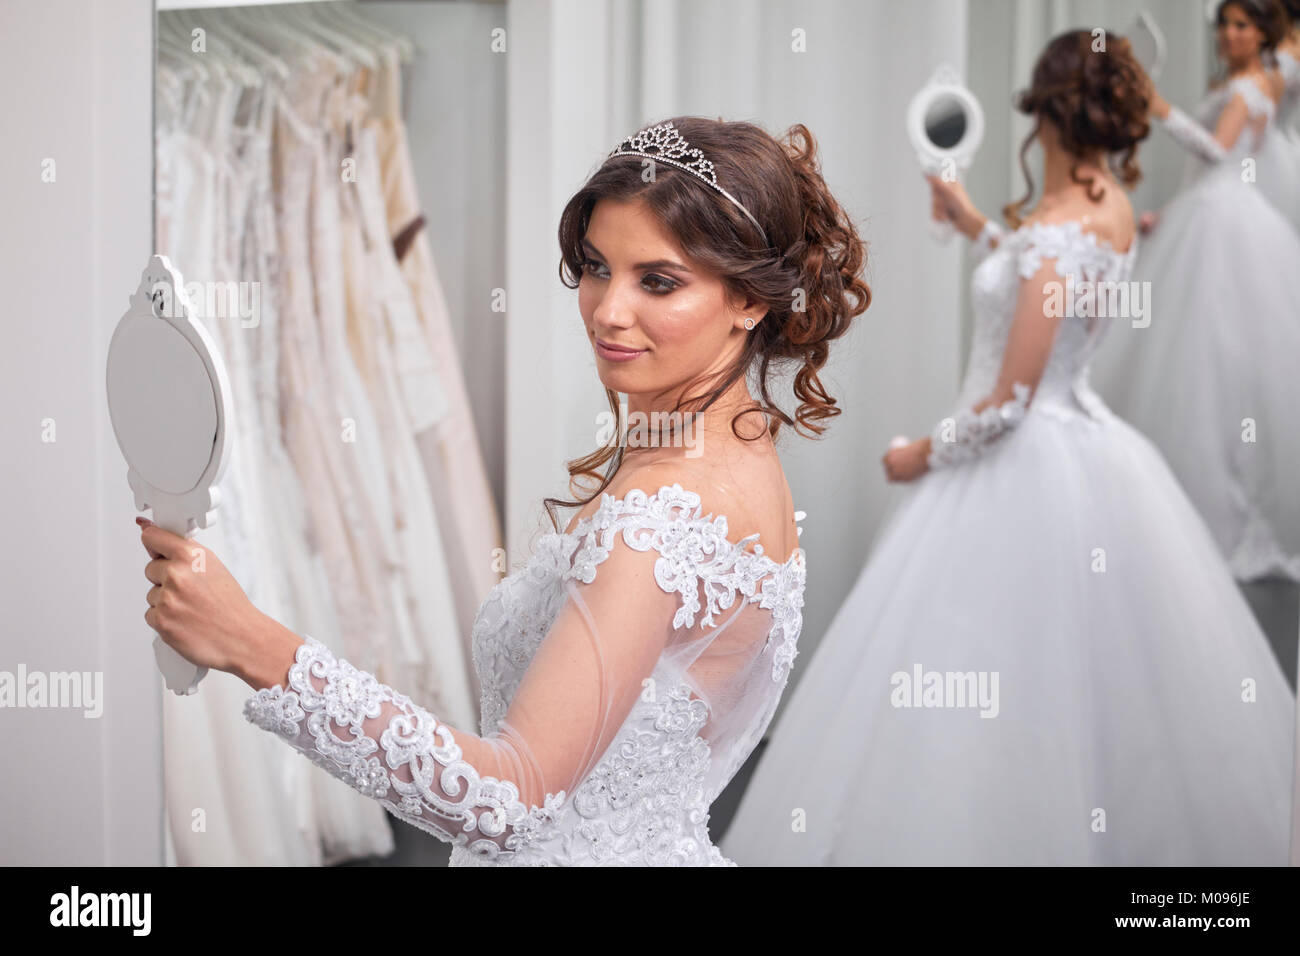 one young bride, looking at self in mirror, bridal salon, wearing gown. Stock Photo